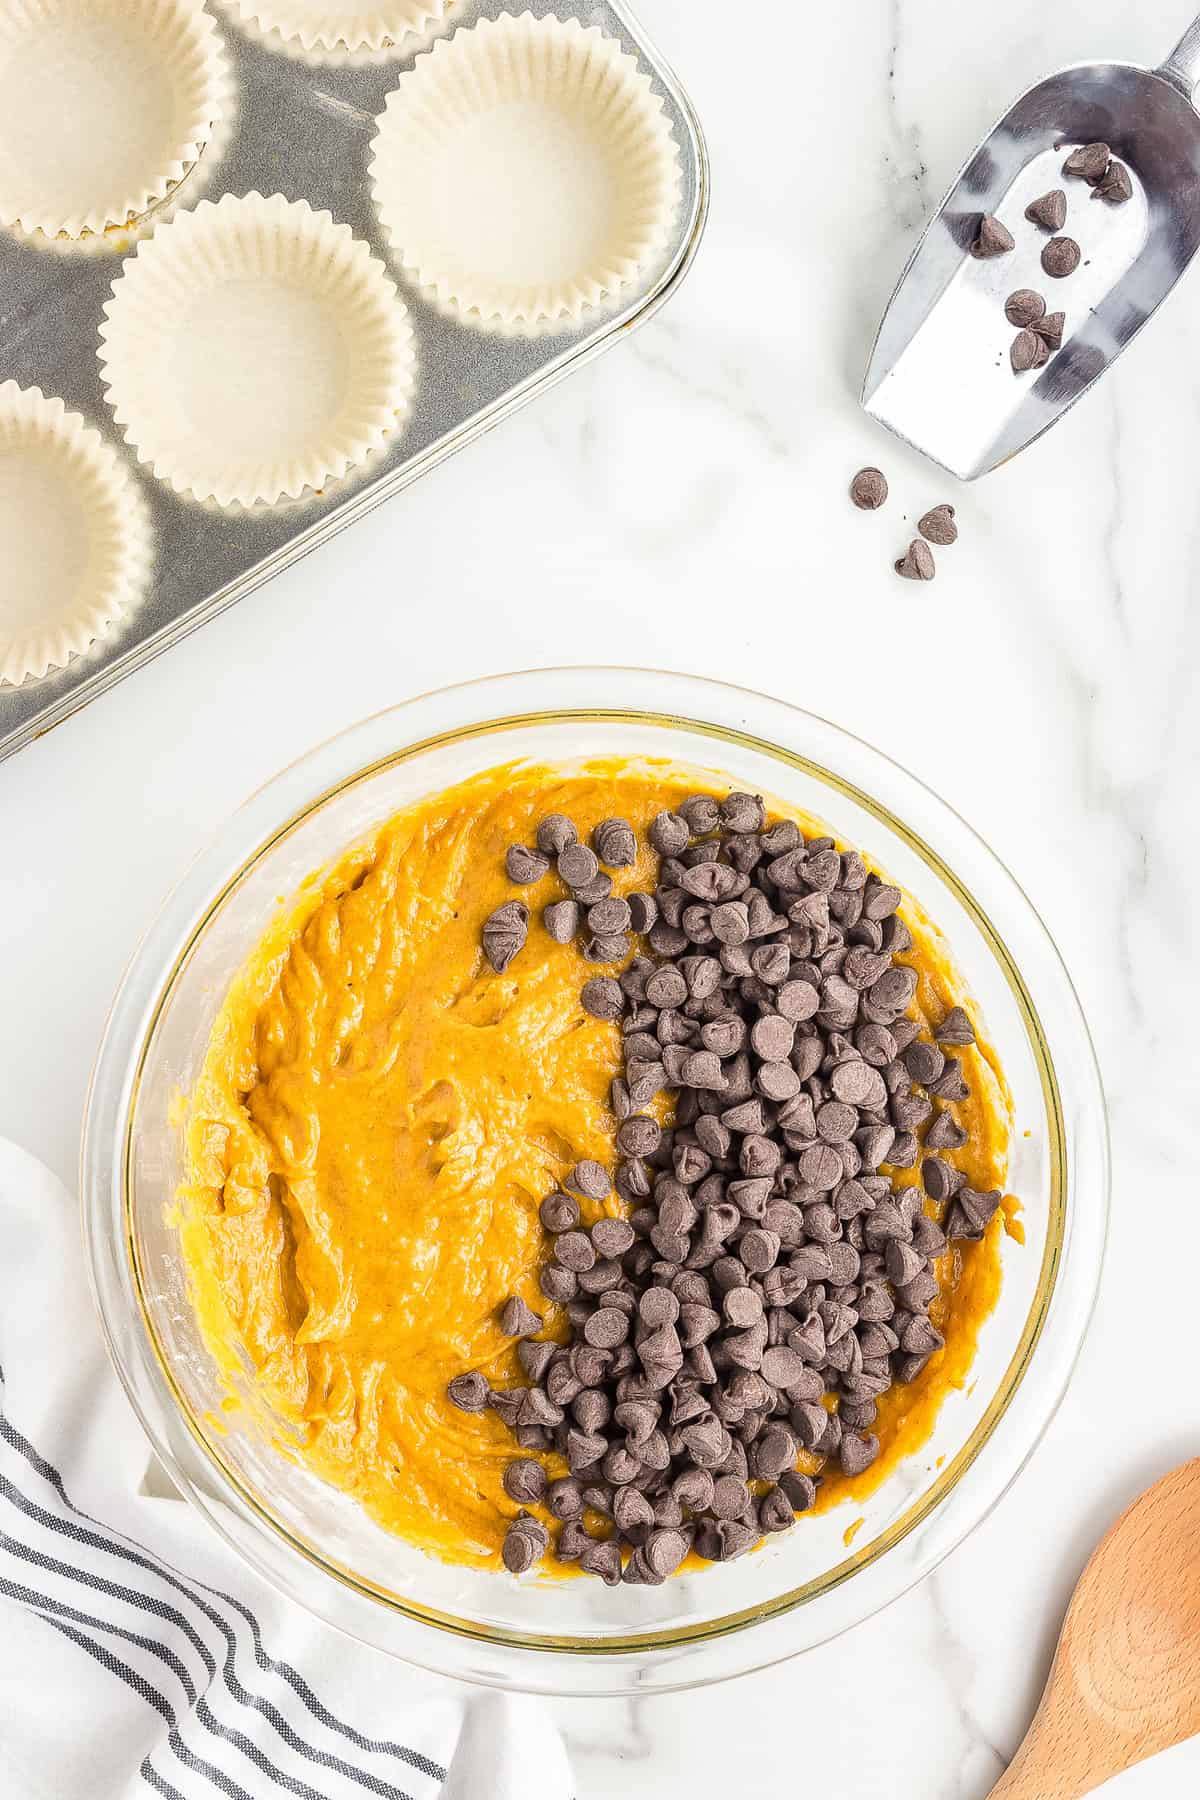 Pumpkin muffin batter with chocolate chips on top in bowl